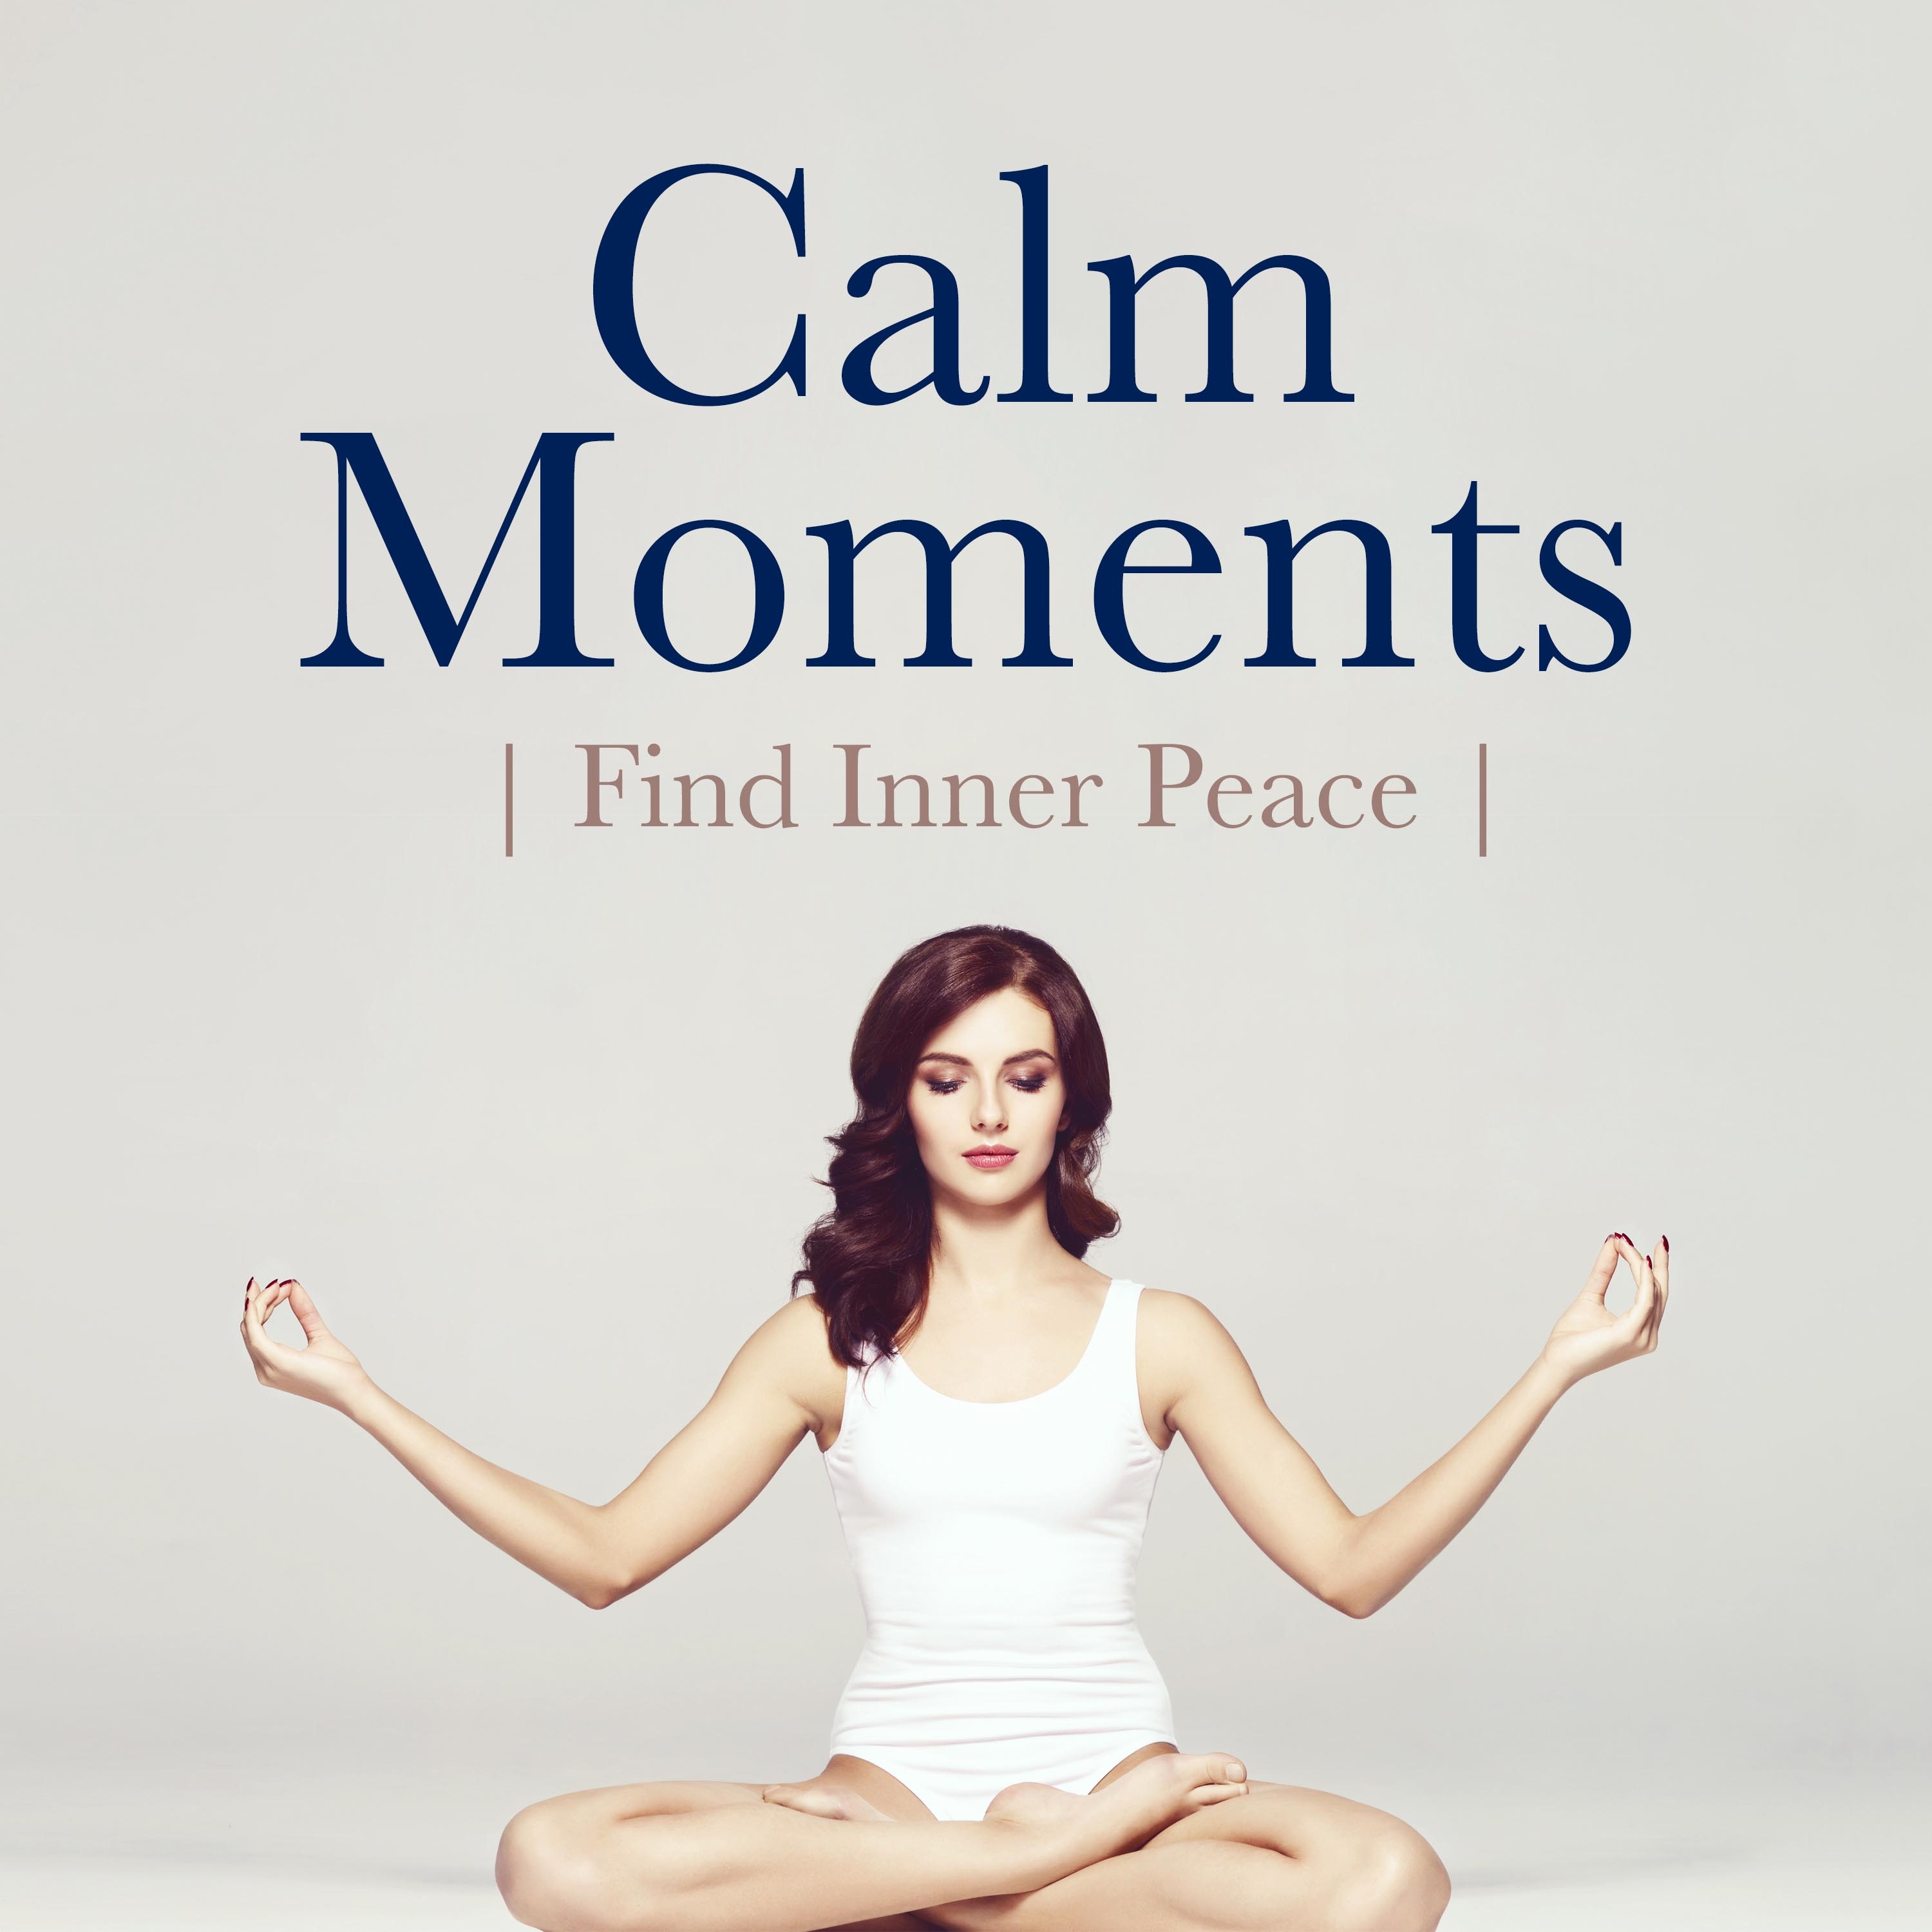 Calm Moments: Dreamy, Relaxing Music to Find Inner Peace